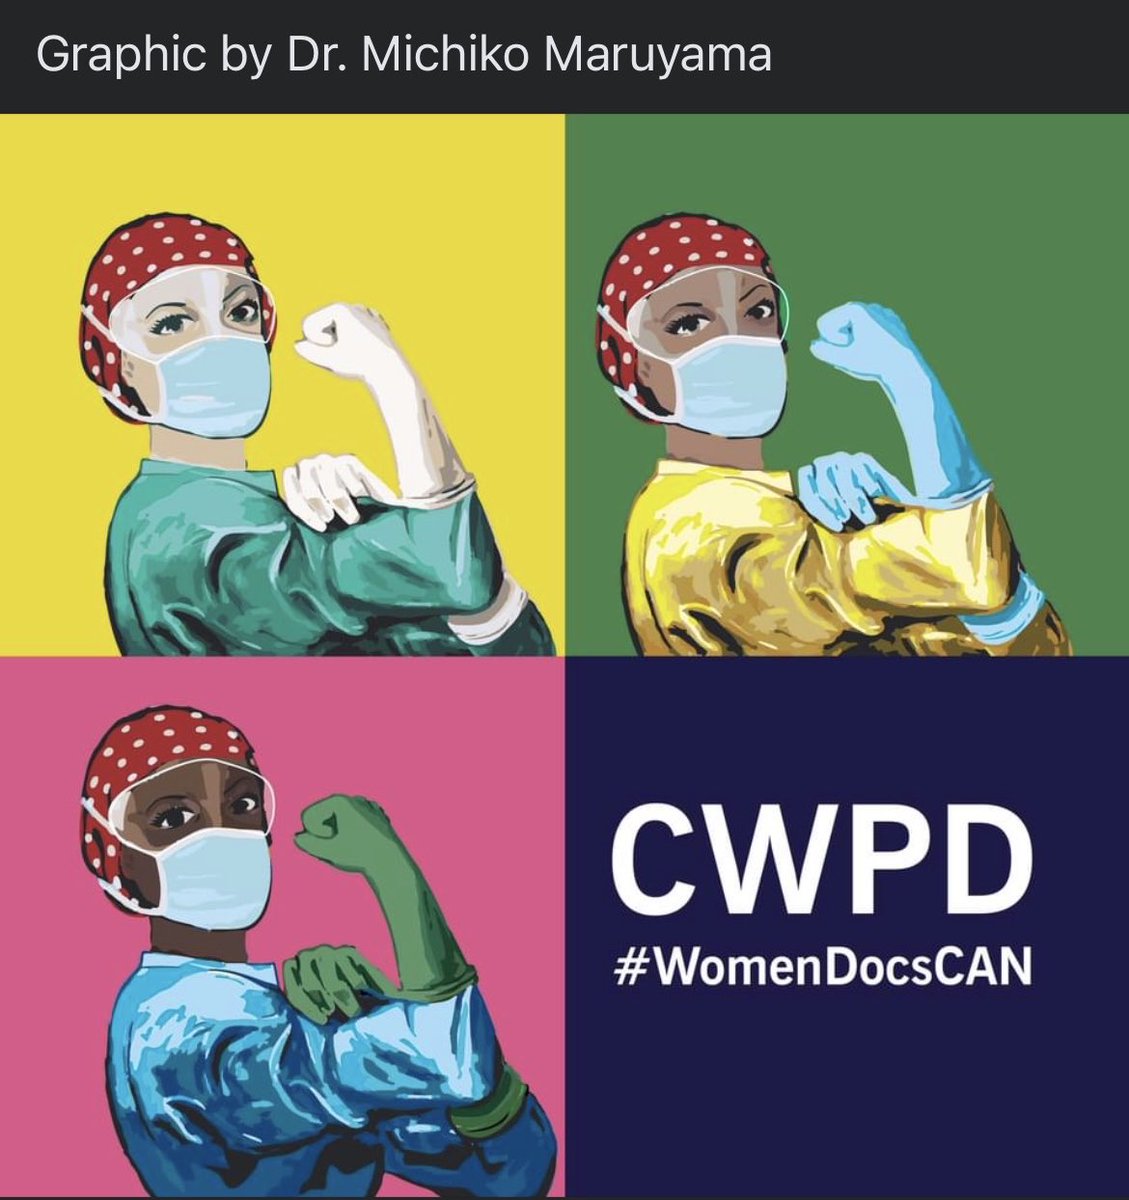 Shared from a fantastic group of colleagues:
Happy Canadian Women Physicians Day! 
This is a day for us to reflect on the challenges we've overcome, and where we're going. To everyone breaking down barriers and paving the way, we see you and we thank you! 
#WomenDocsCAN